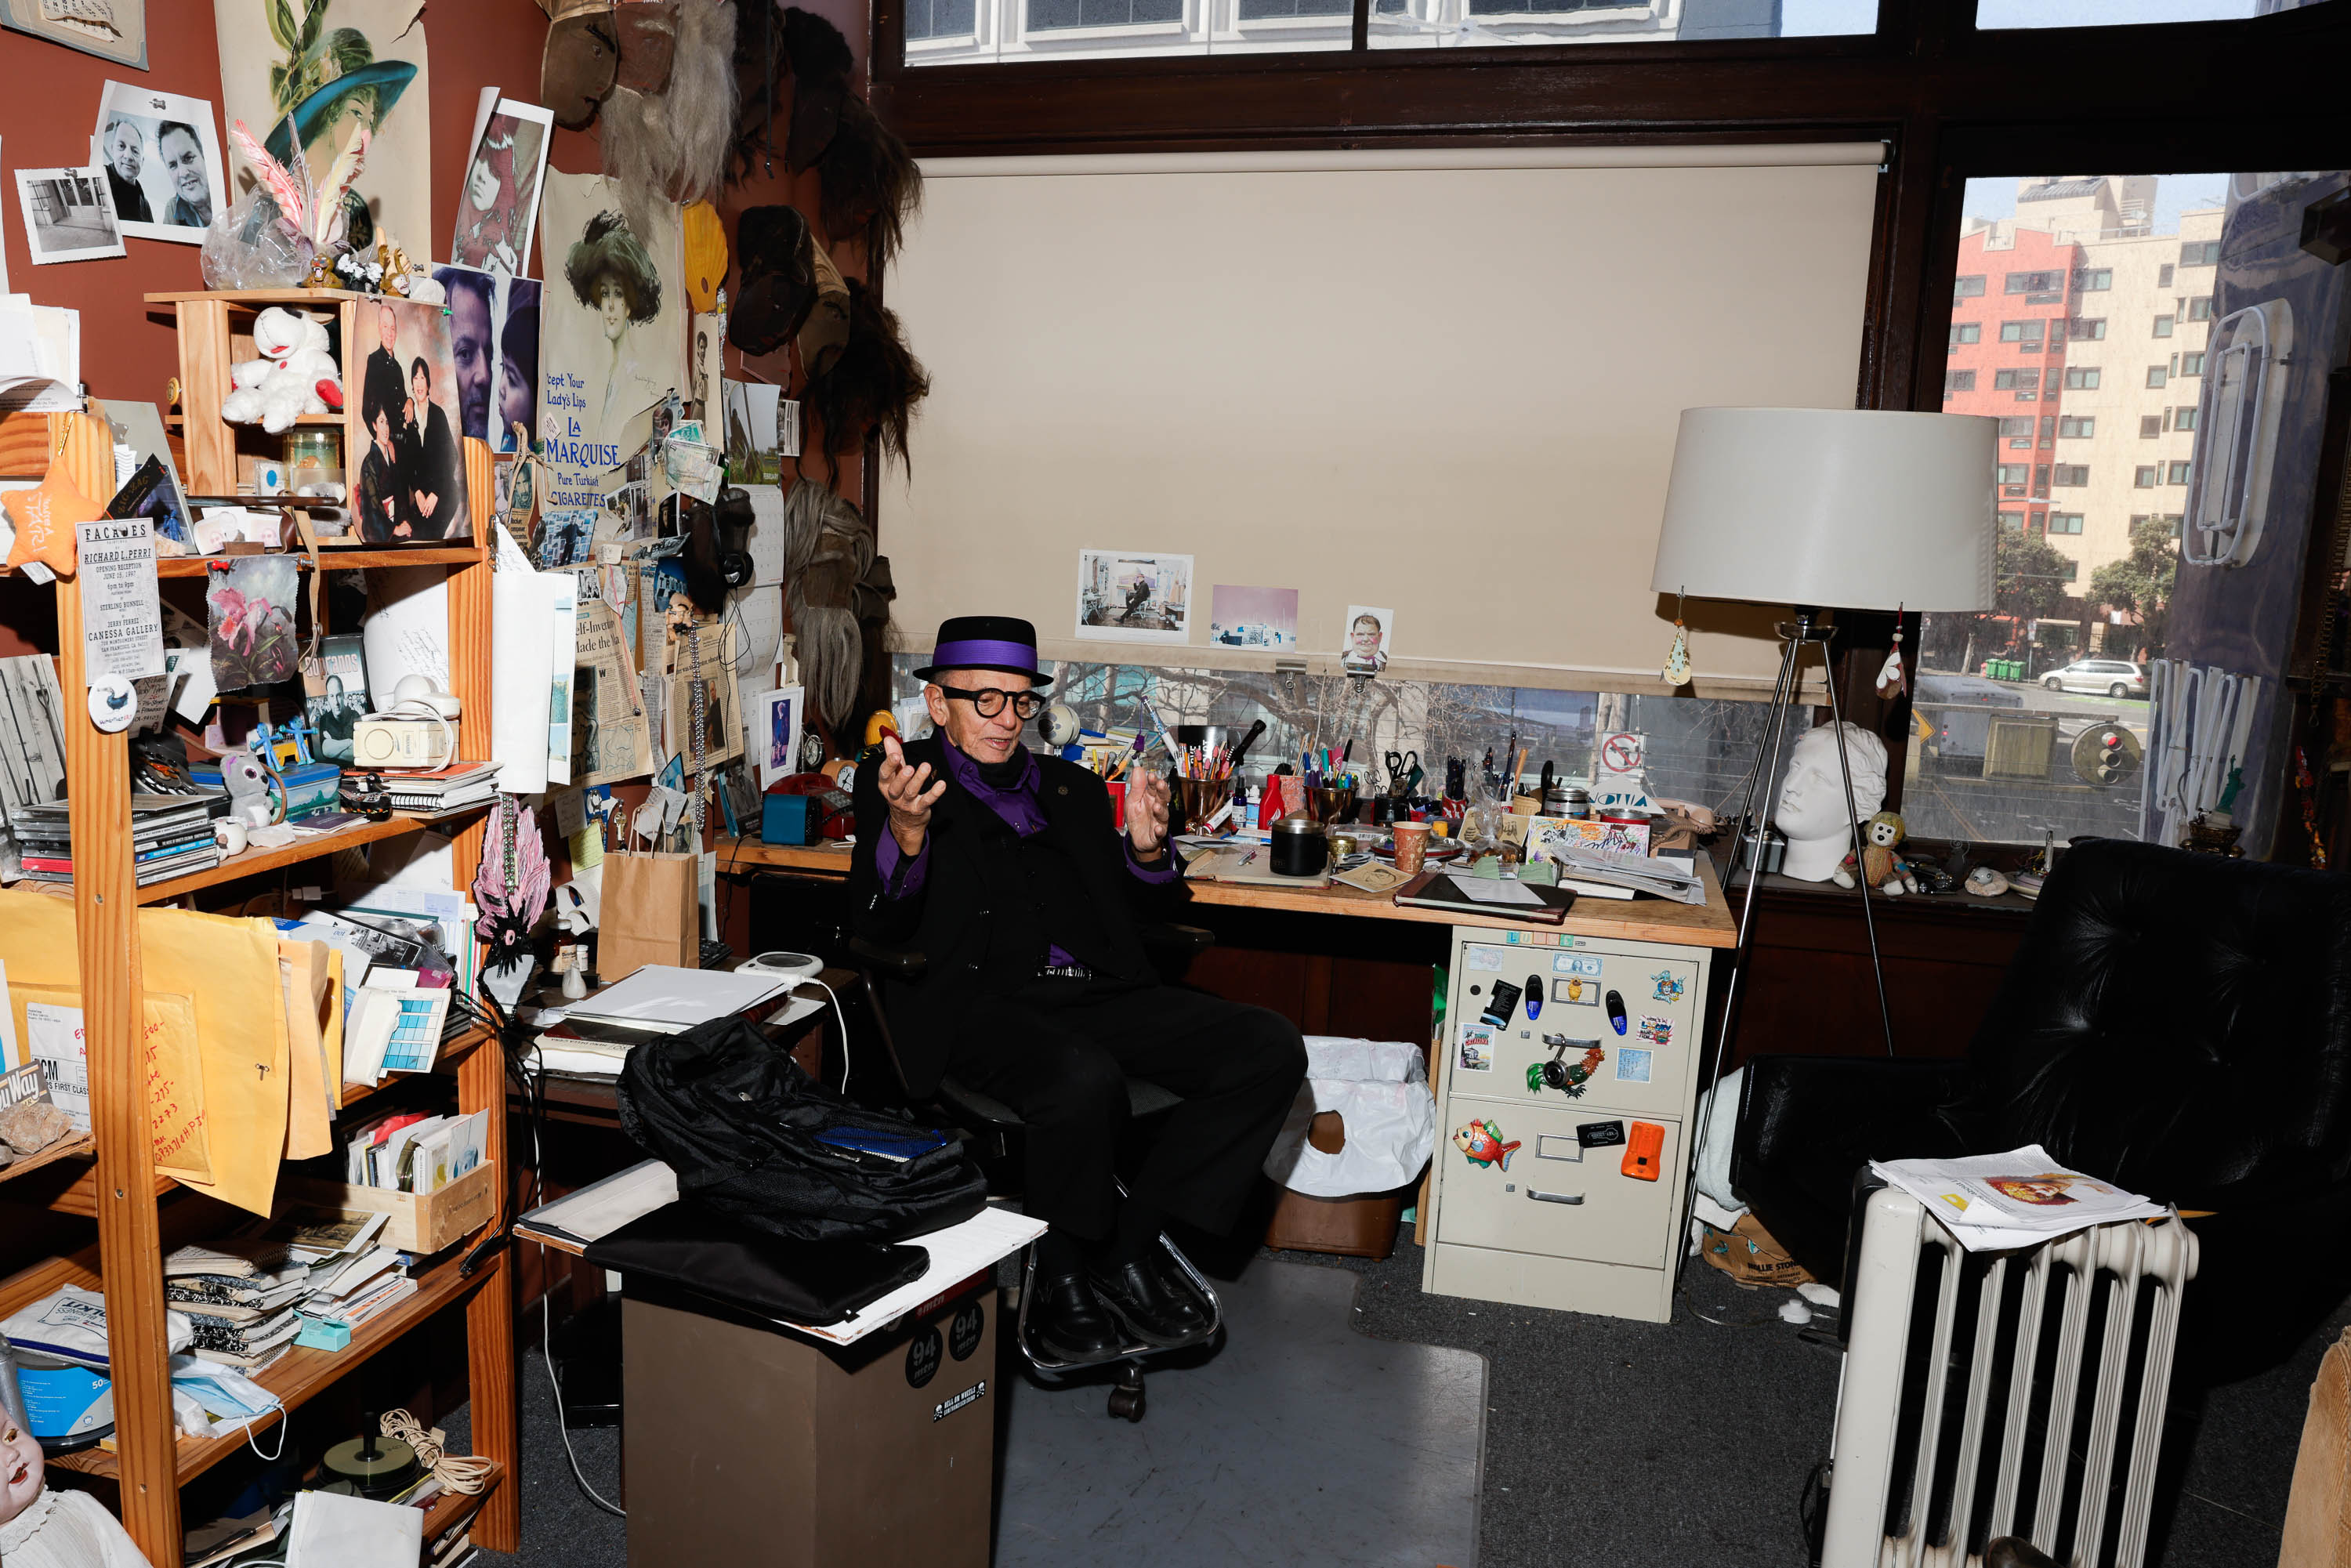 A person sits amidst a cluttered room full of eclectic items, art supplies, and memorabilia.